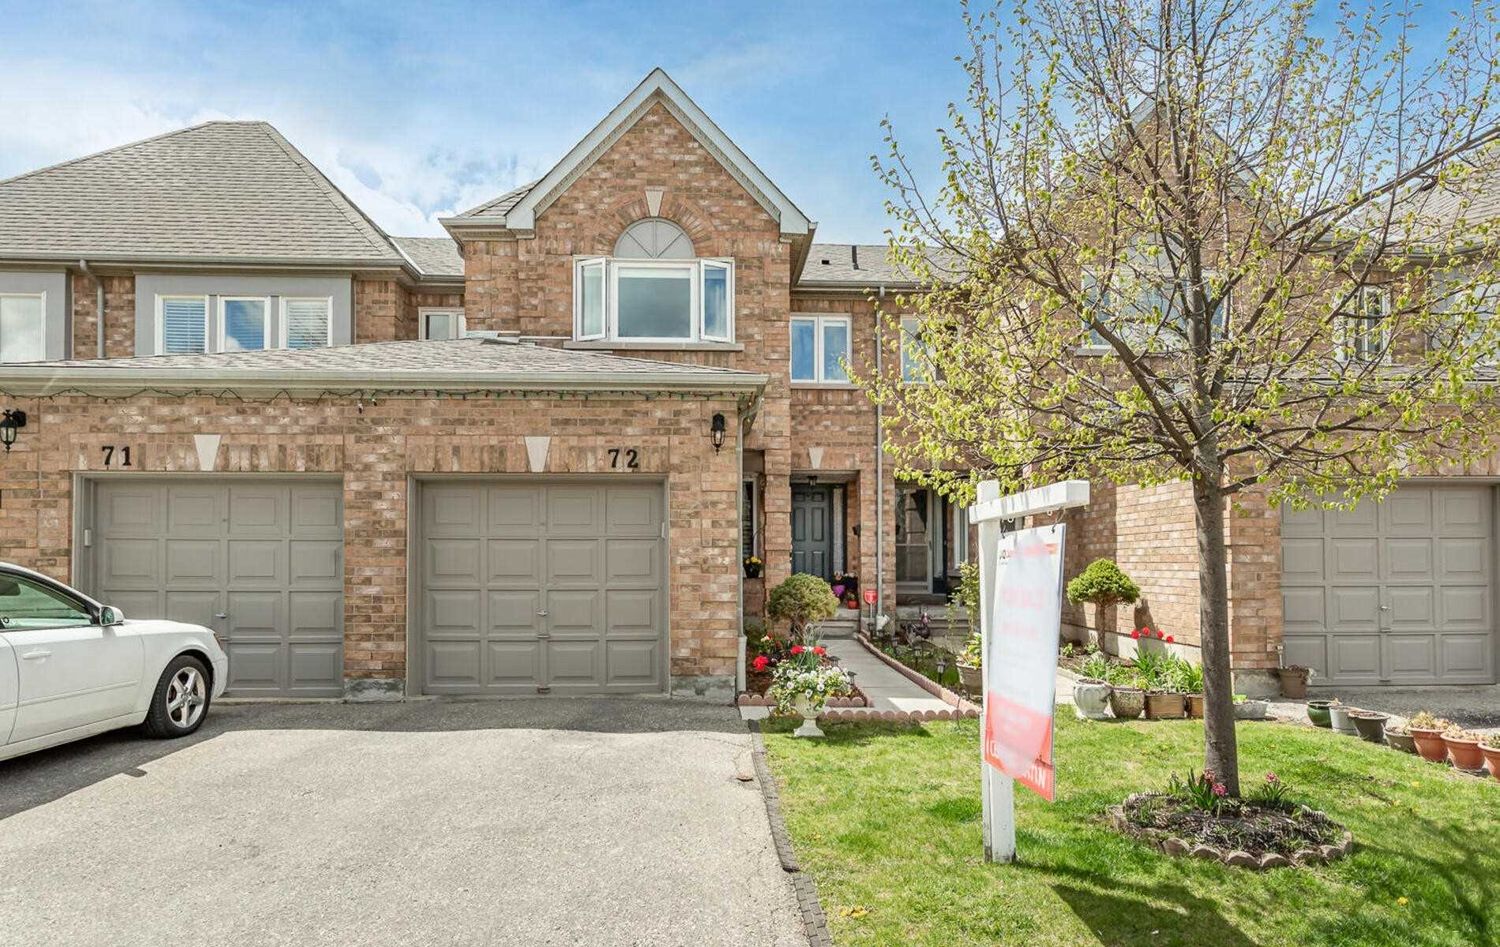 5230 Glen Erin Drive. 5230 Glen Erin Drive Townhomes is located in  Mississauga, Toronto - image #2 of 2